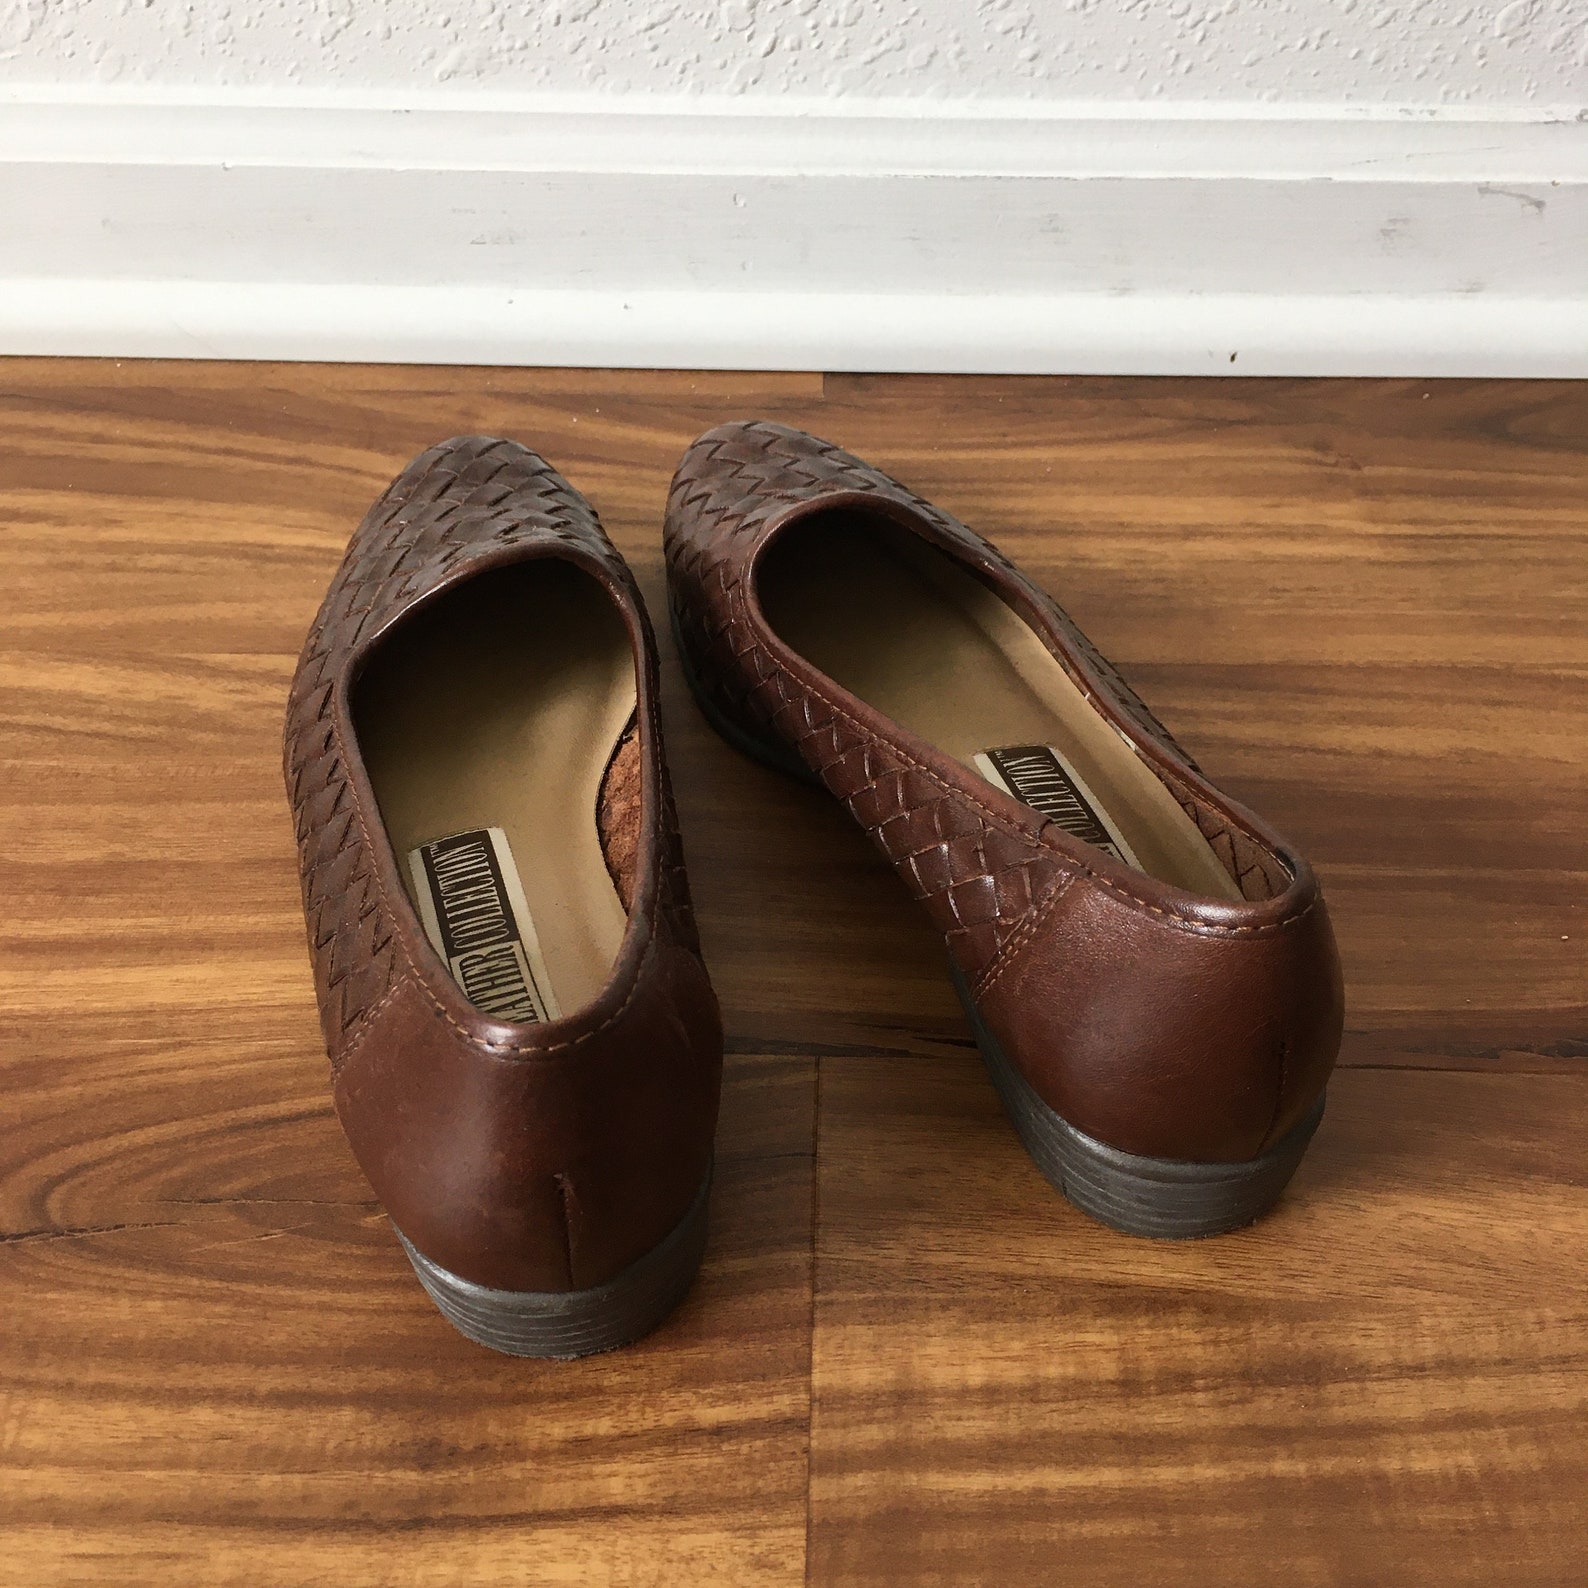 90s Brown Woven Leather Flats / Huaraches Vintage 1990's | Etsy